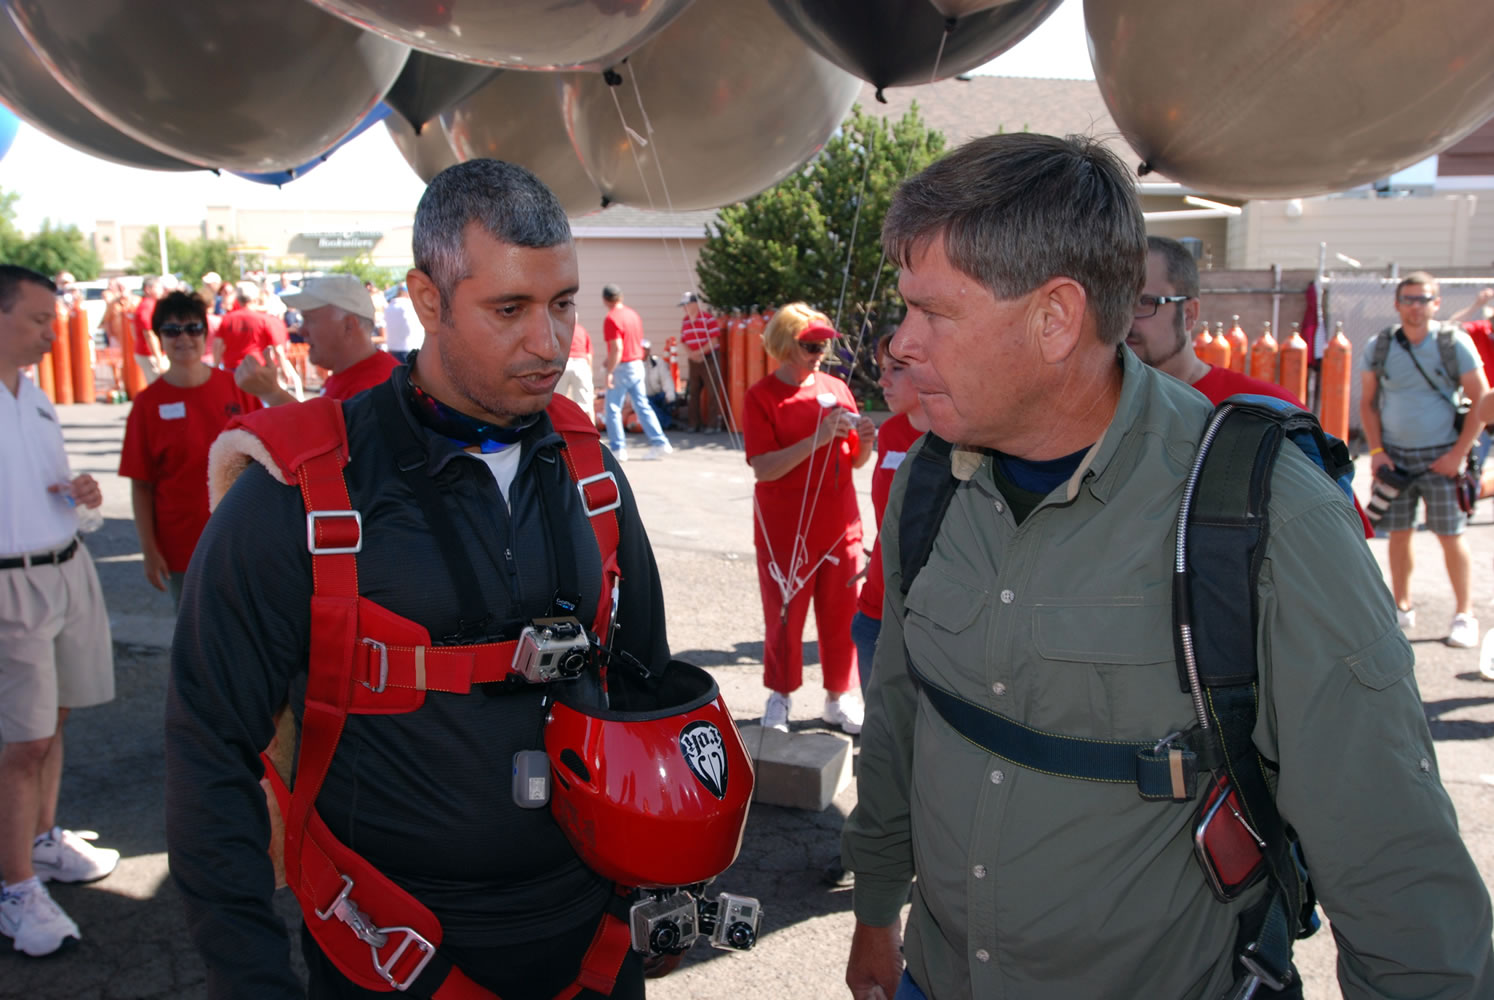 FILE - This July 14, 2012 file photo shows gas station owner Kent Couch, right, conferring with Iraqi adventurer Fareed Lafta before taking off from Bend, Ore., in tandem lawn chairs suspended from helium-filled party balloons. Couch says his lawn chair ballooning days are probably done, at least in the U.S., due to the high price of helium and a $4,500 fine from the Federal Aviation Administration over the 2012 flight with Lafta.